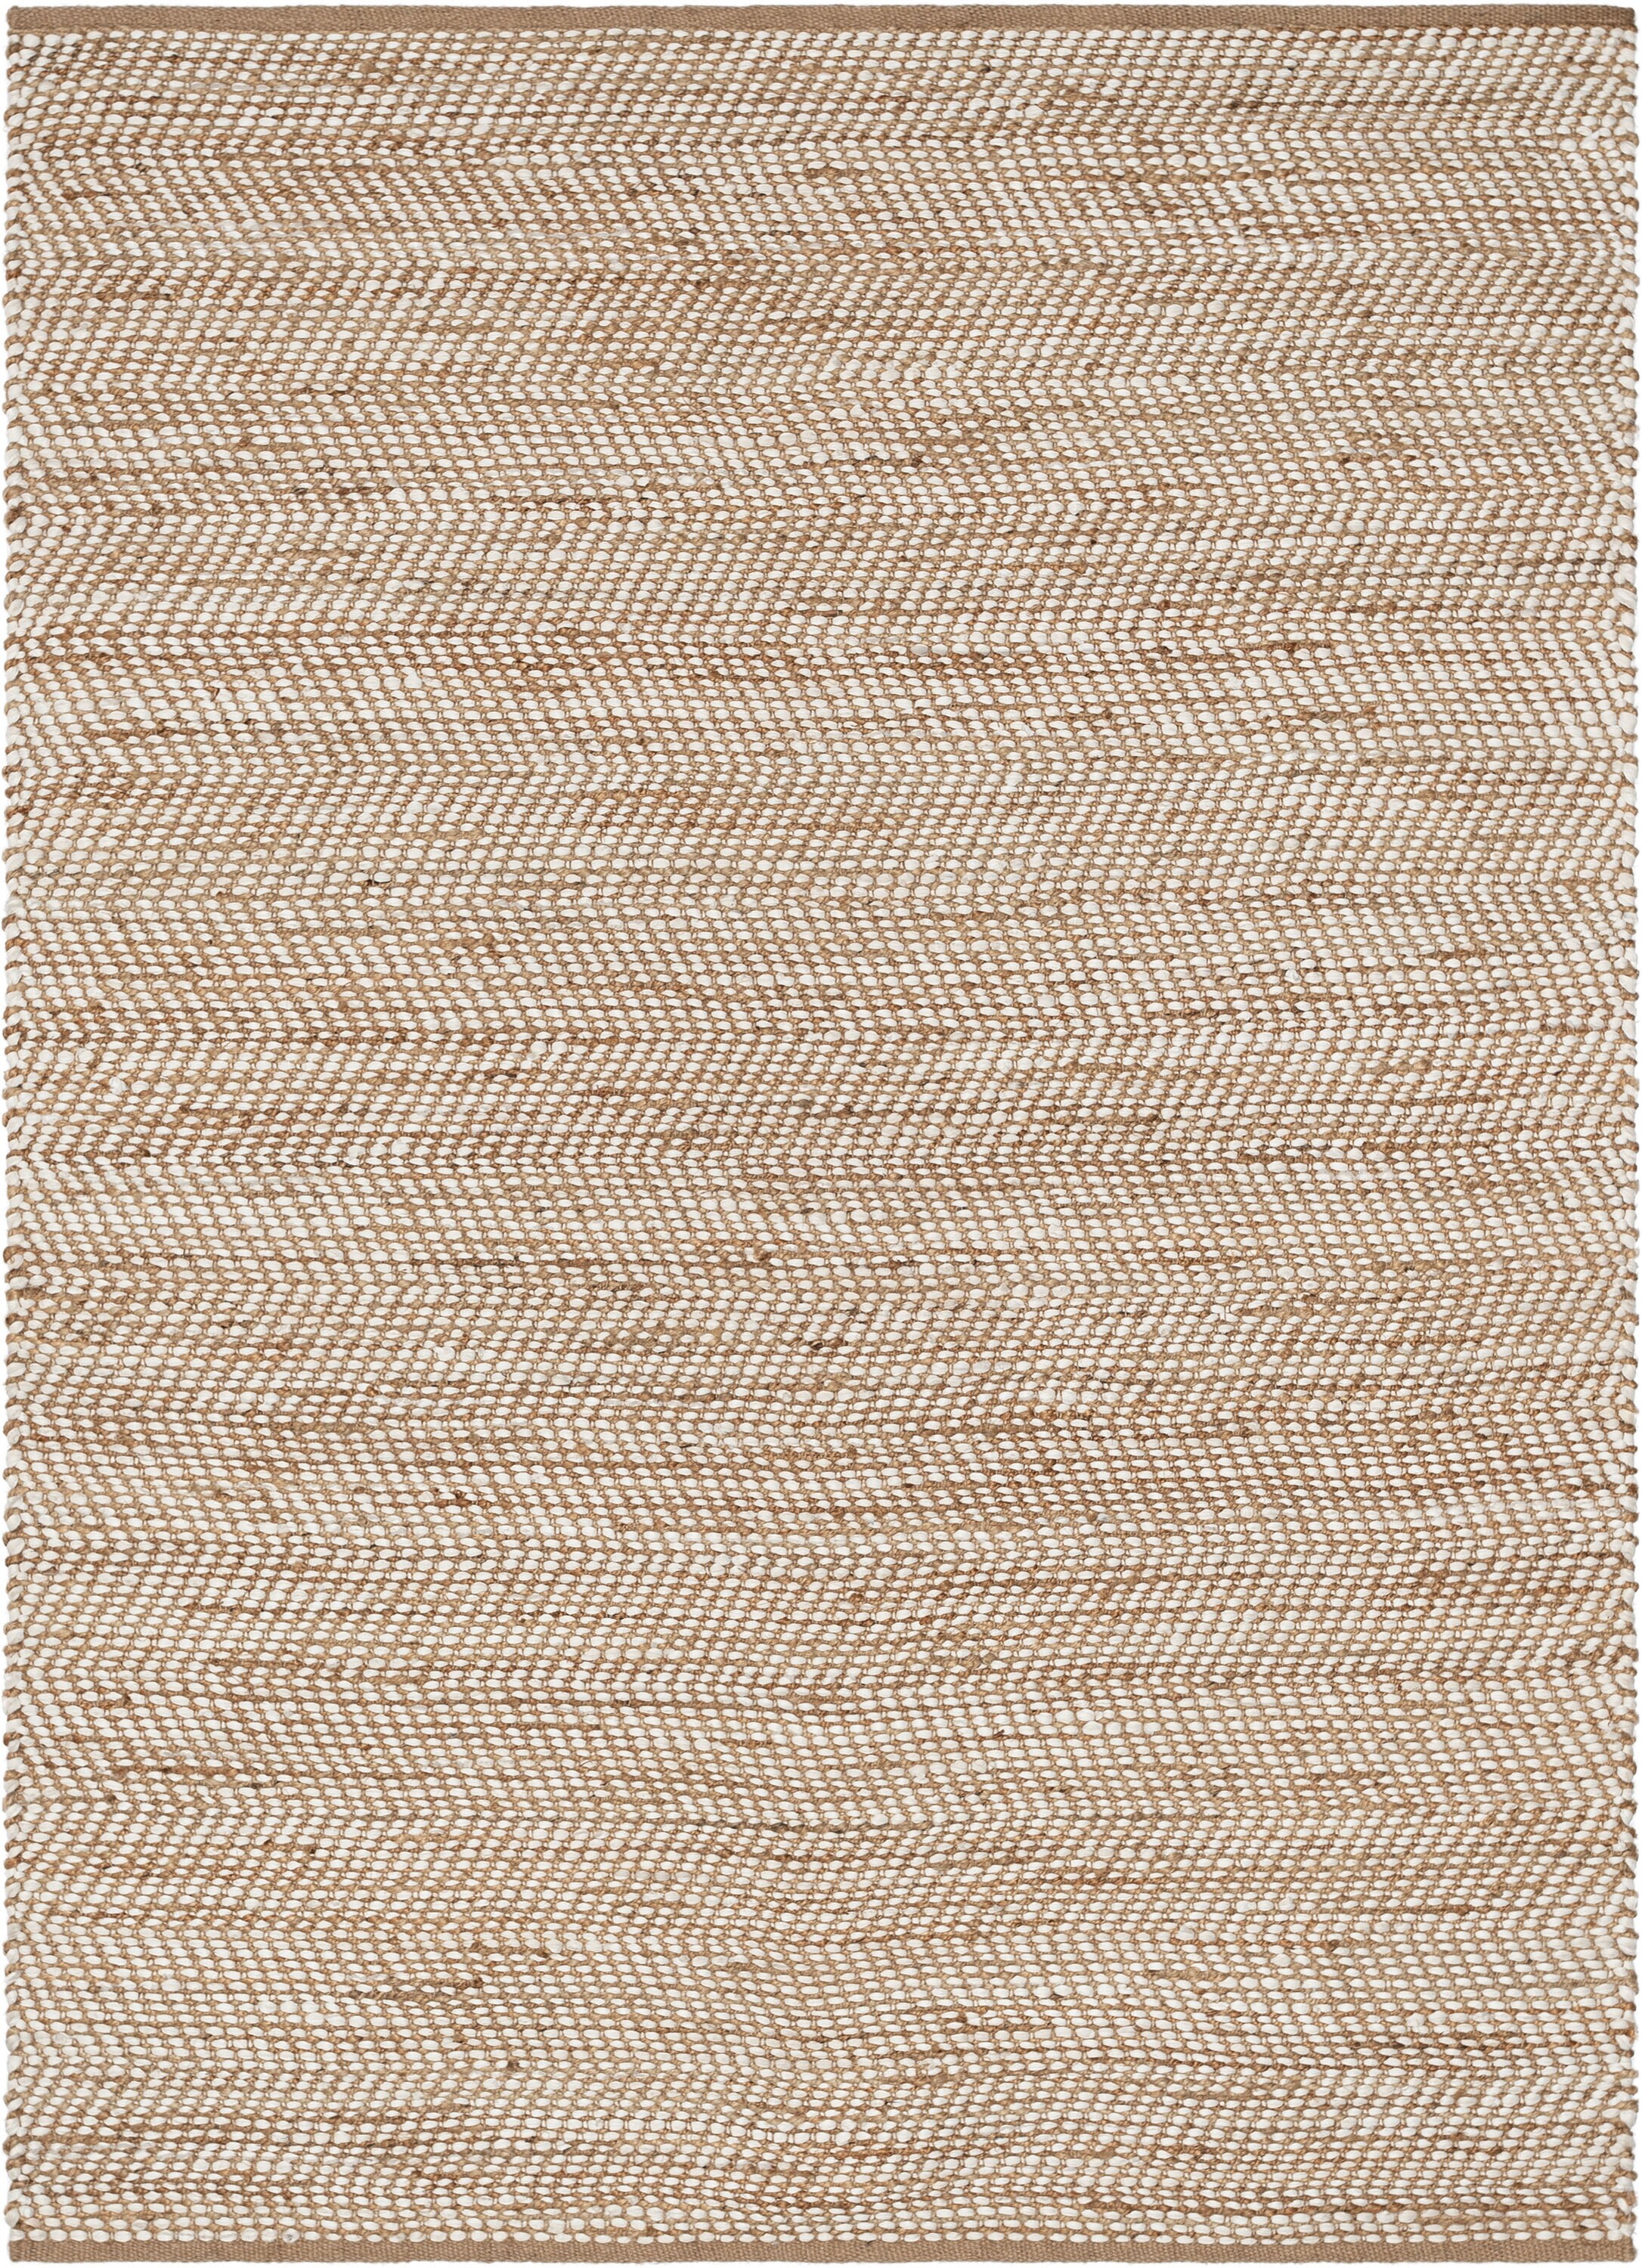 Well Woven Sree Natural & Black Color Hand-Woven Chunky-Textured Jute  Chevron Geometric Area Rug 5x7 (5' x 7'6) 